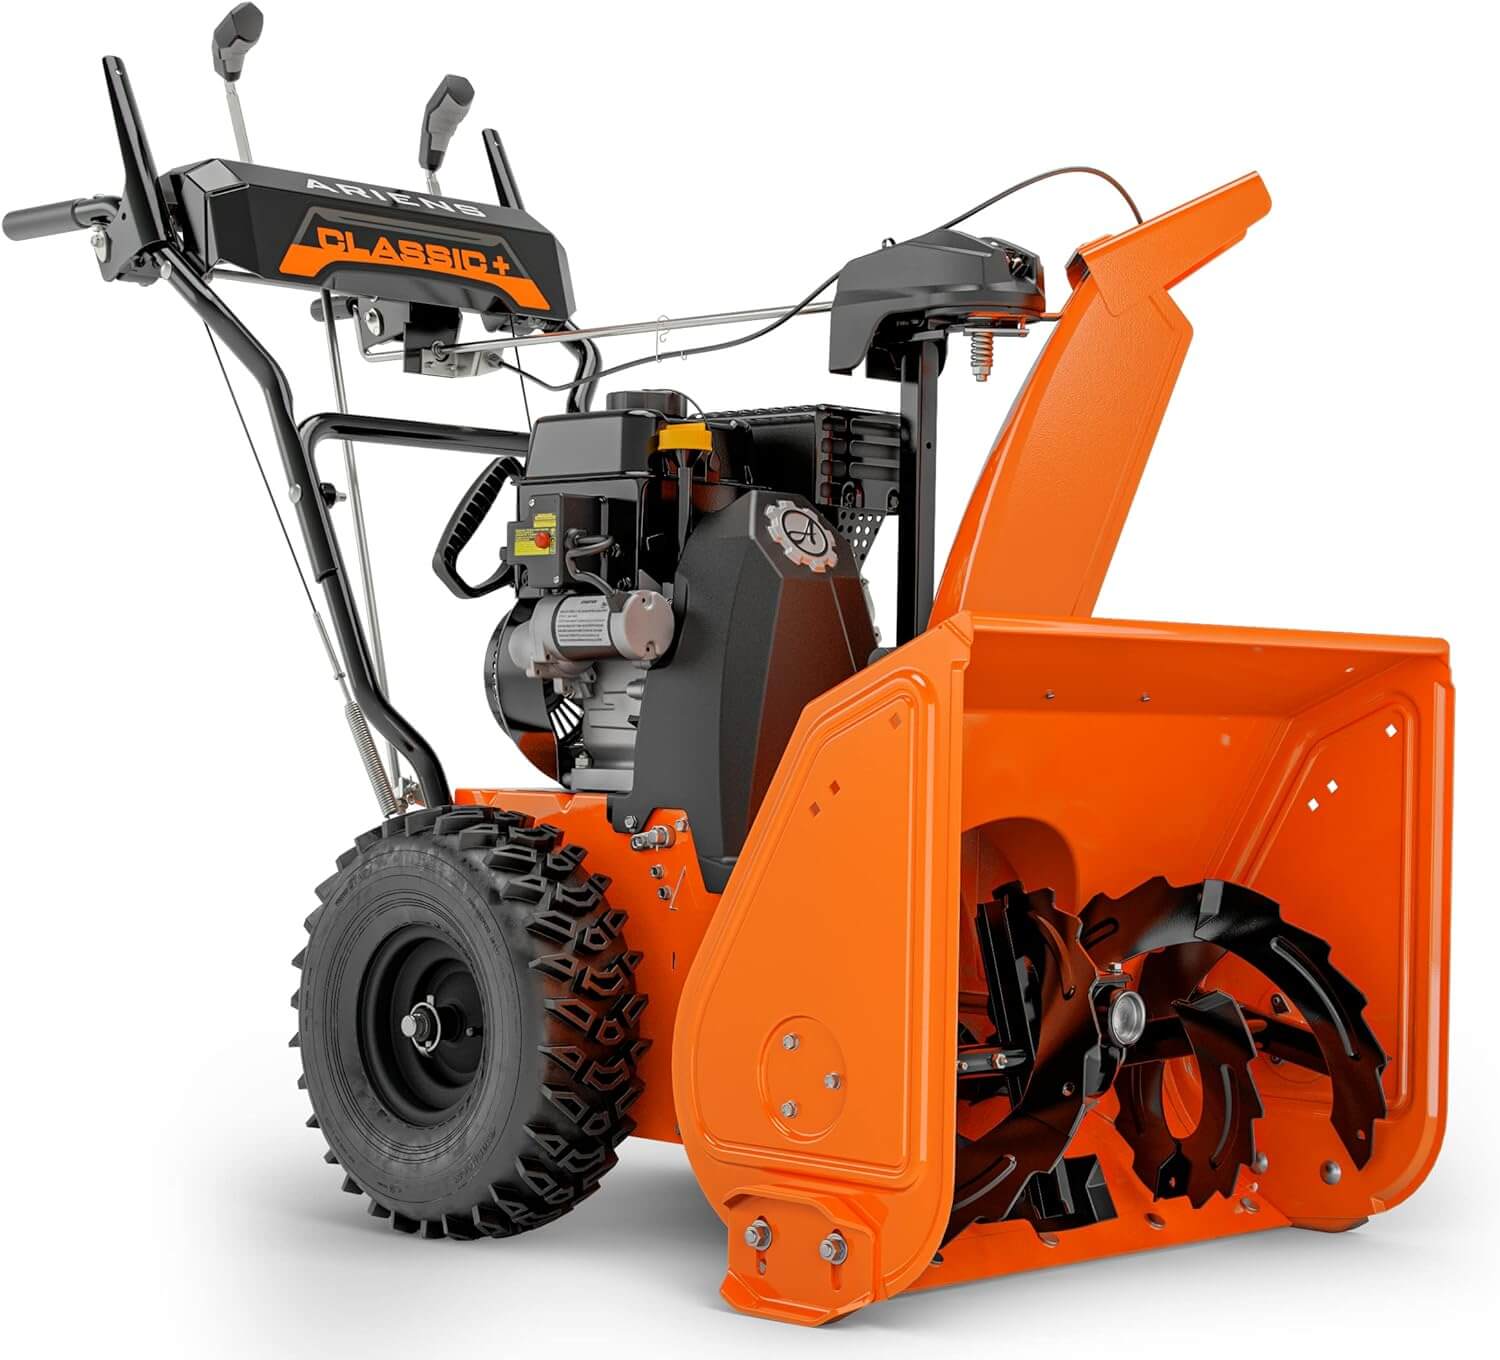 Ariens Classic 24+ 24" 2 Stage Snow Thrower